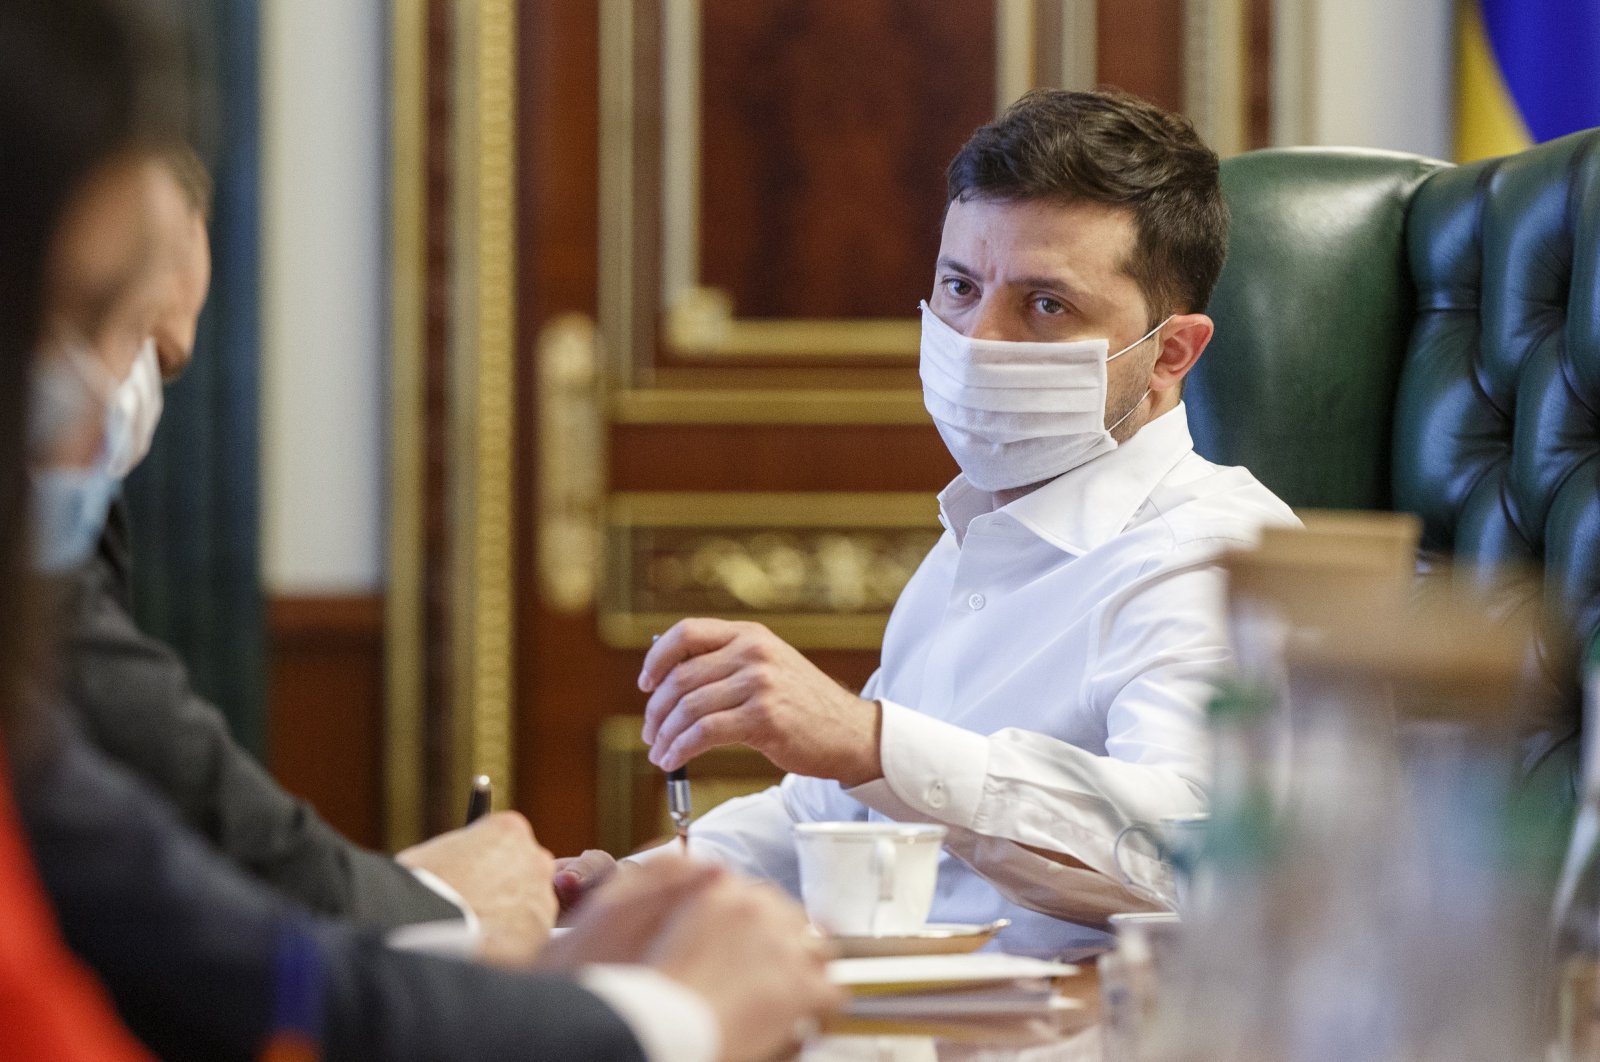 Ukrainian President Volodymyr Zelenskiy in a face mask to protect against coronavirus, discusses the COVID-19 situation in the country with officials in his office in Kyiv, Ukraine on April 22, 2020. (AP Photo)